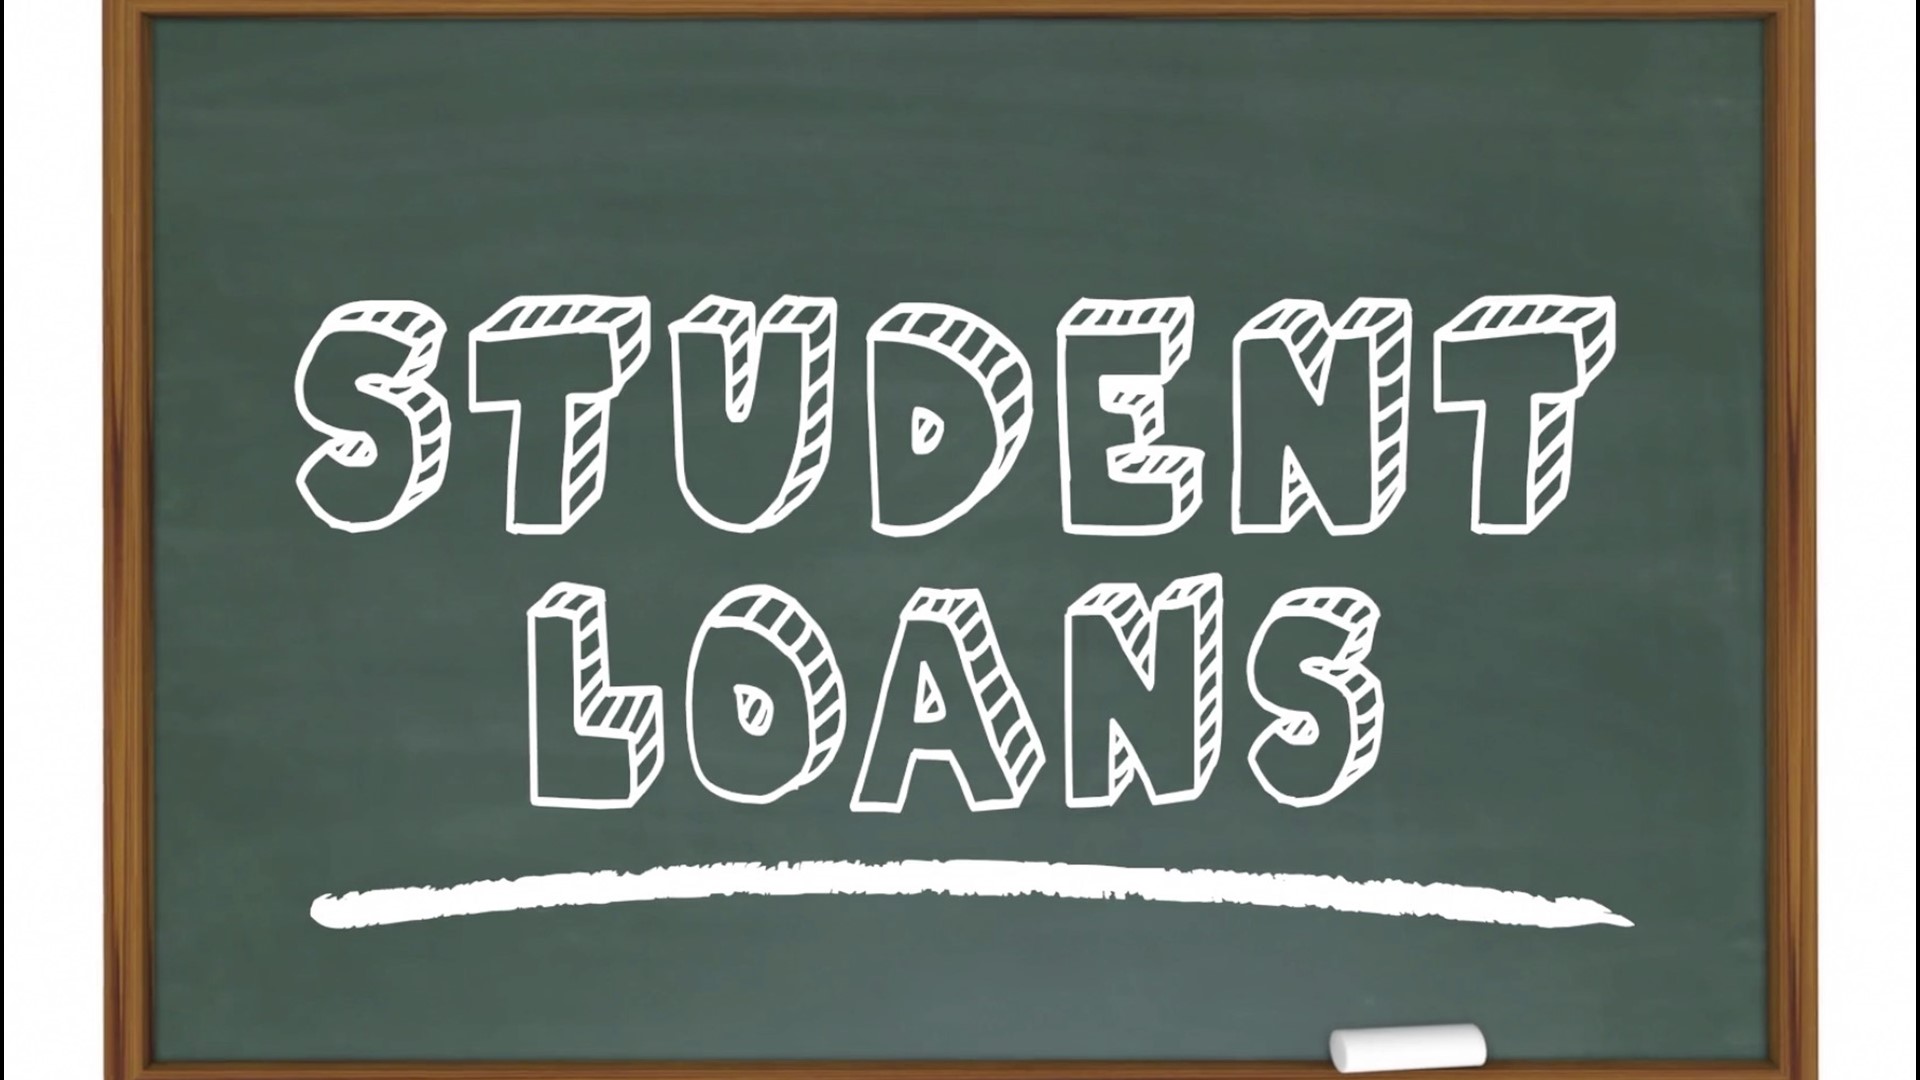 Student loan repayment can be a decades-long journey.